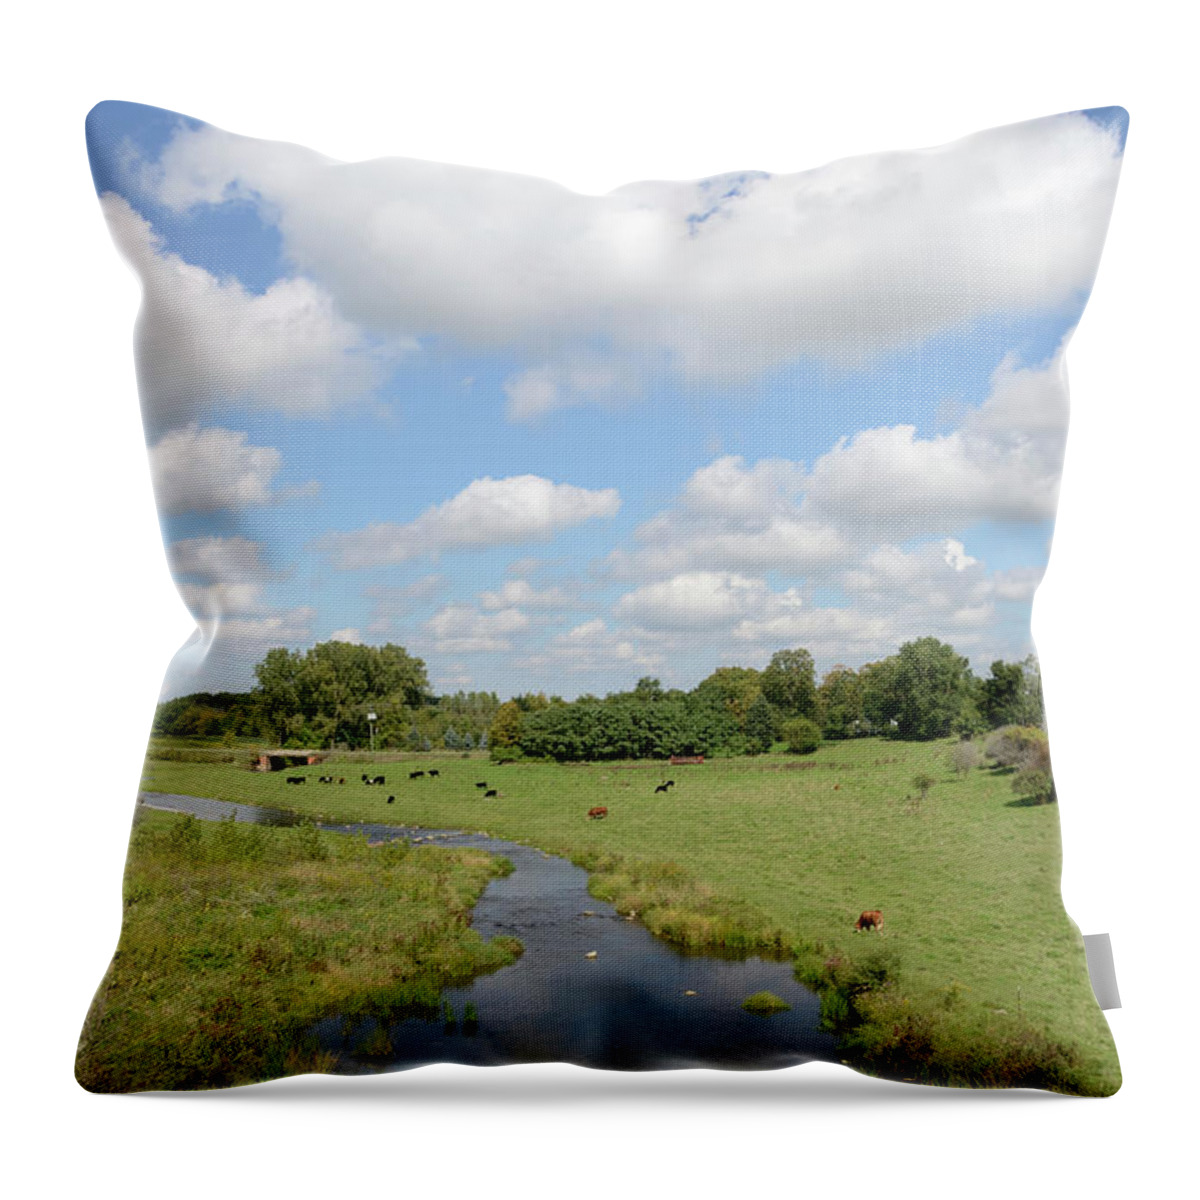 Grass Throw Pillow featuring the photograph Traditional Farm by Rivernorthphotography